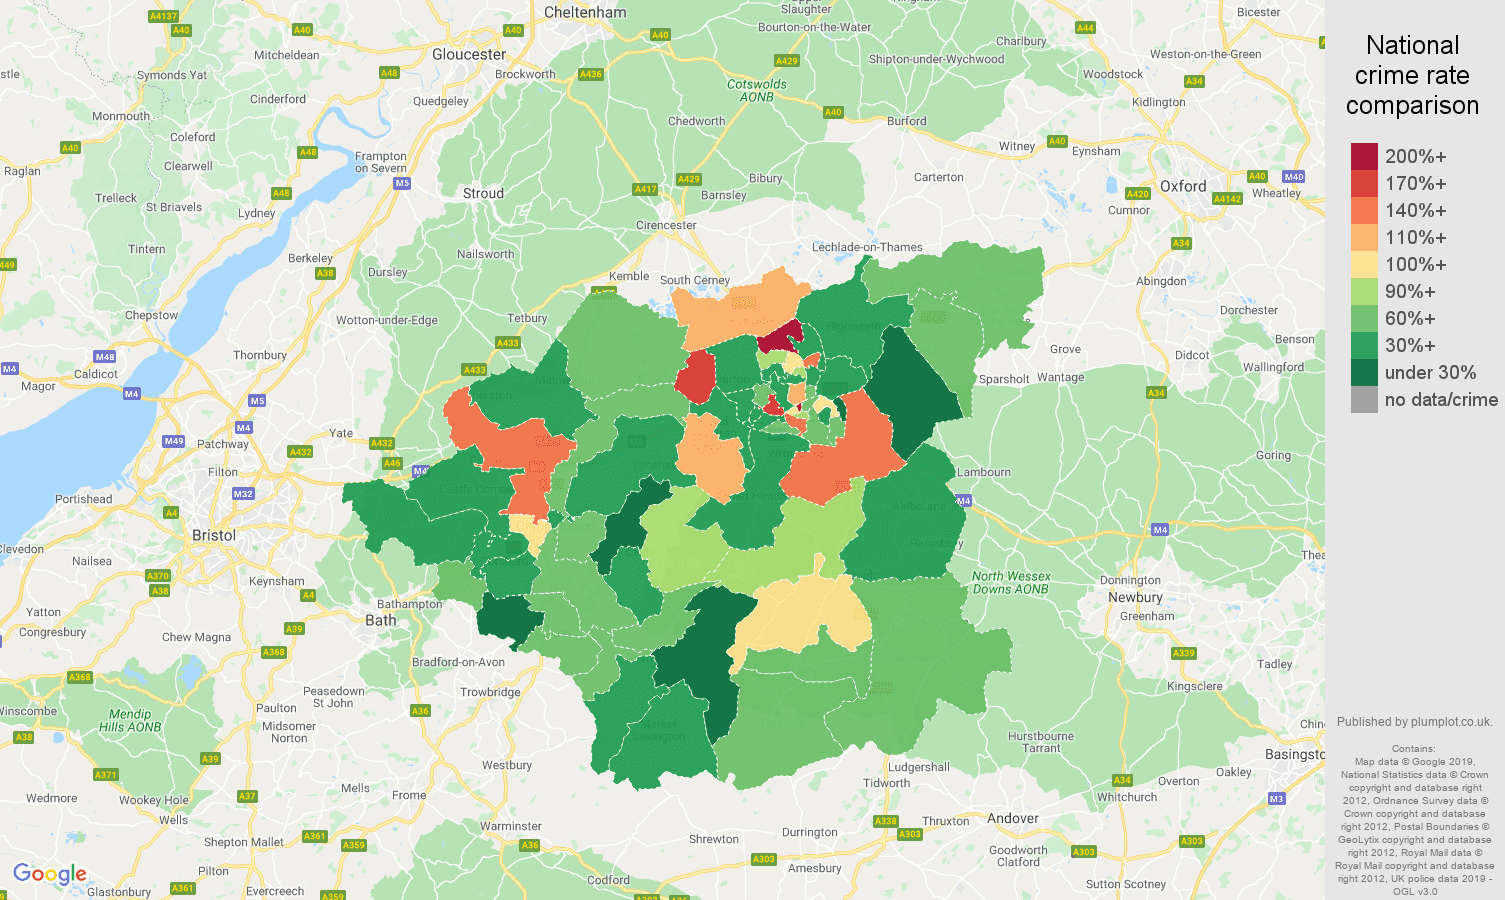 Swindon other theft crime rate comparison map